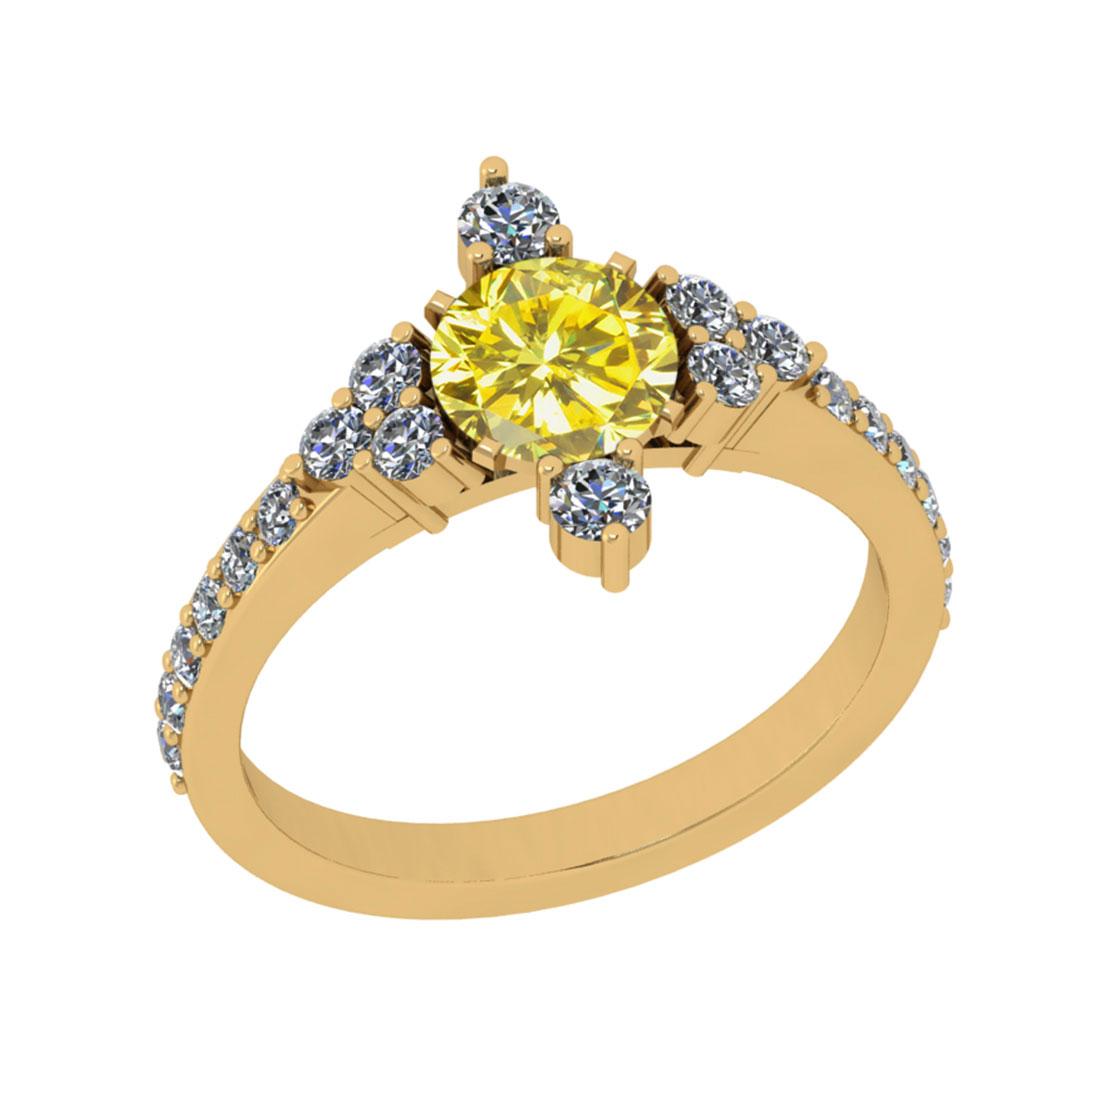 1.80 Ctw I2/I3 Treated Fancy Yellow And White Diamond 14K Yellow Gold Ring